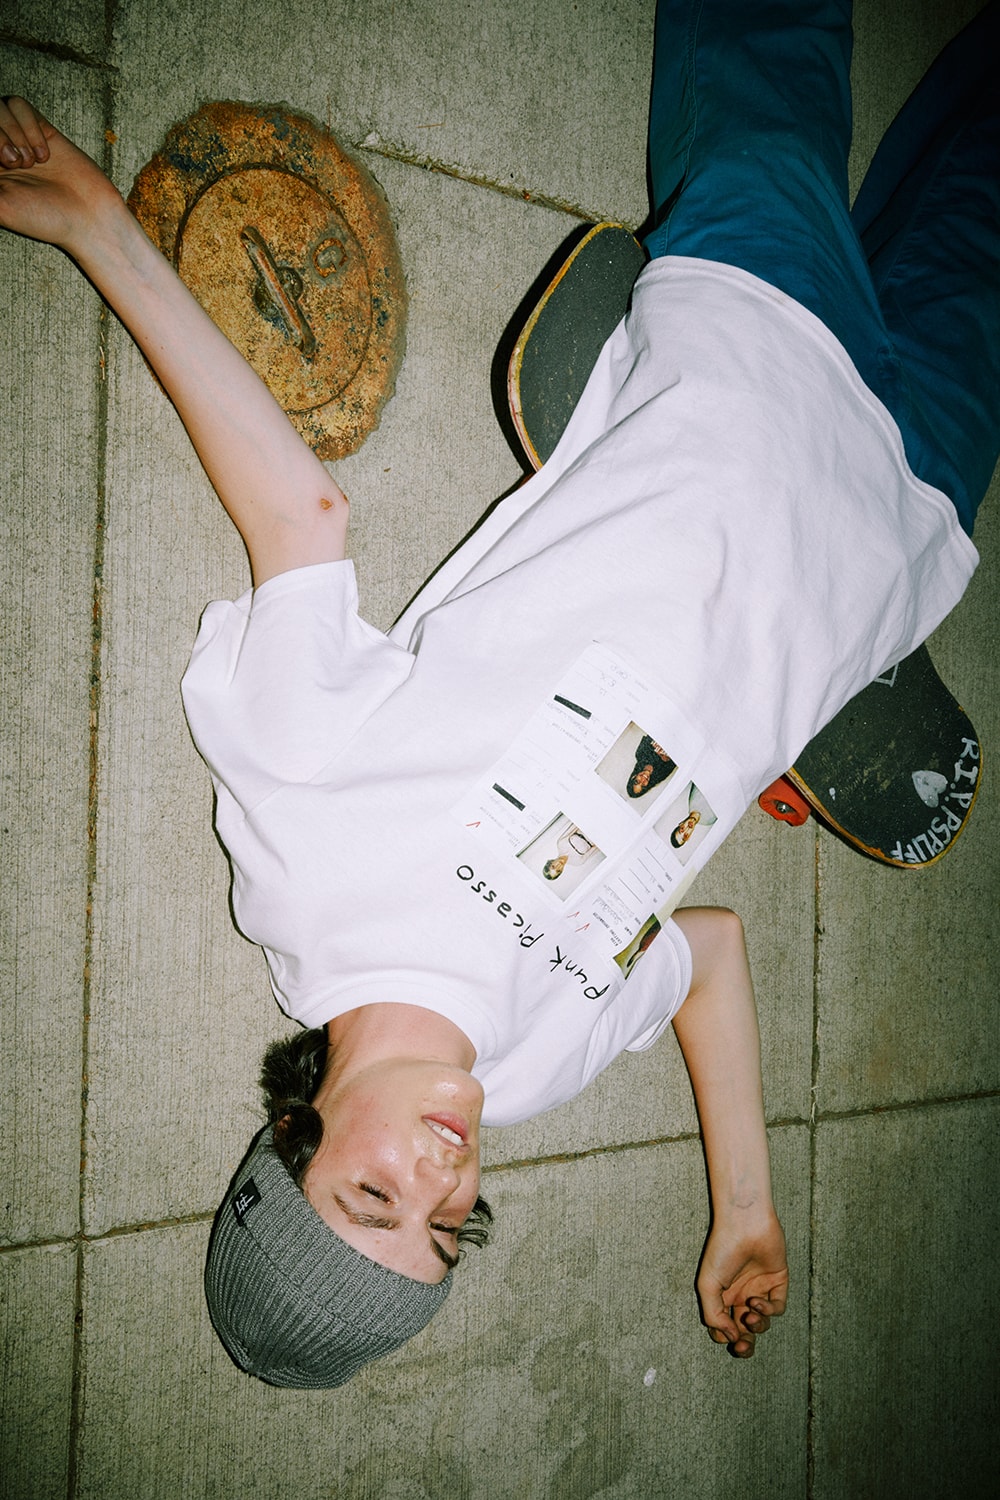 Larry Clark x F-FLAGSTUF-F 2019 Capsule Collection | Hypebeast